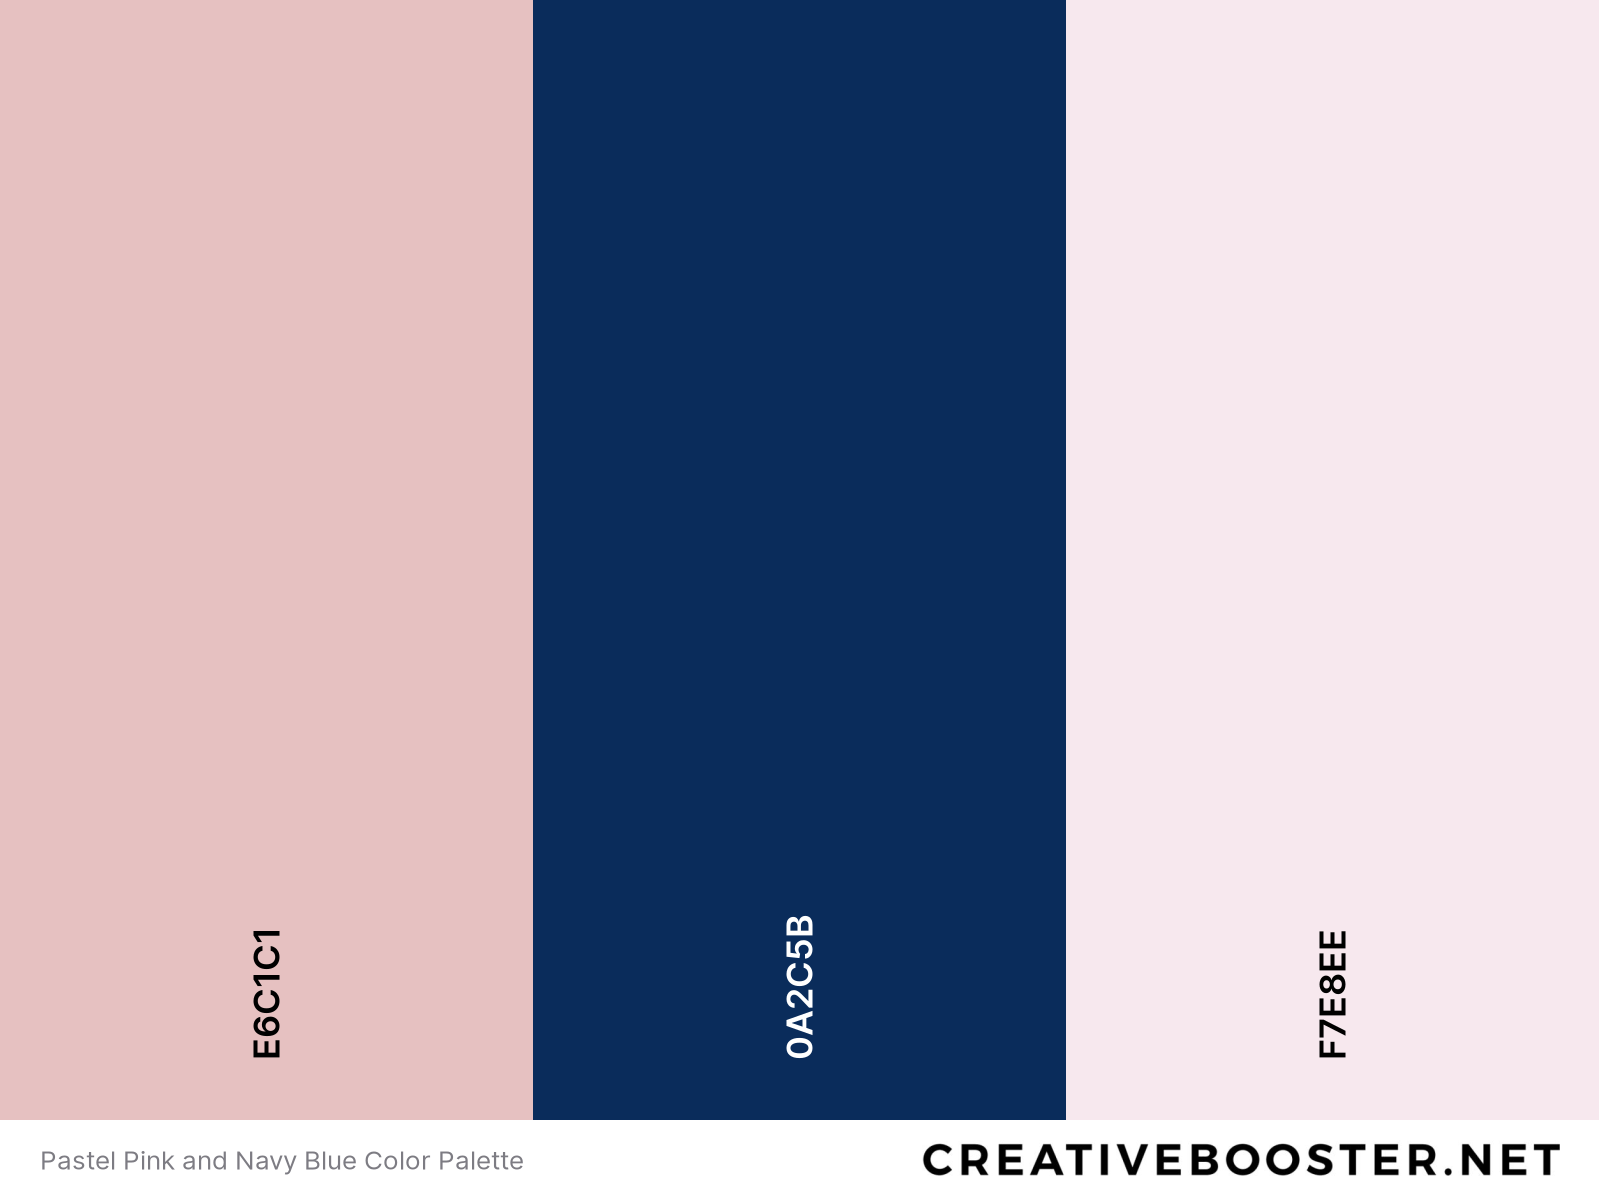 Pastel Pink and Navy Blue Color Palette